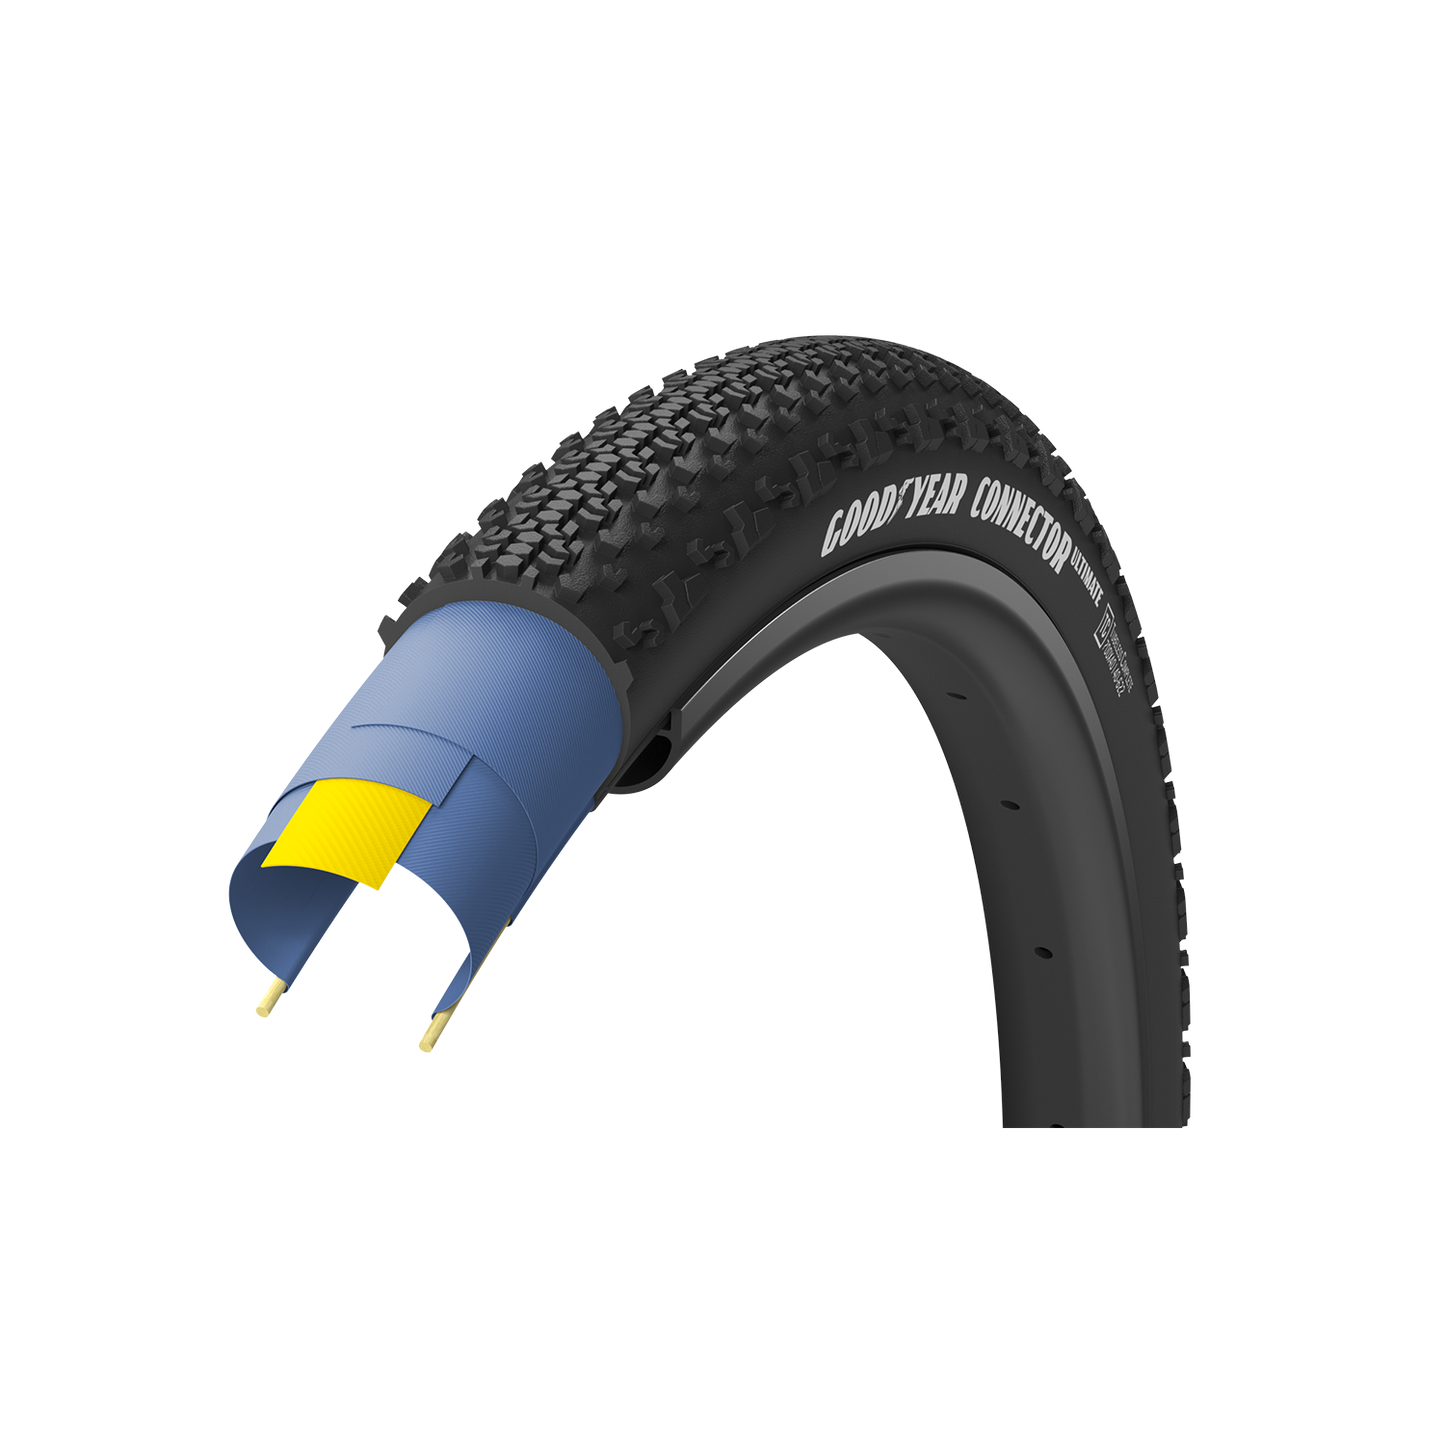 Goodyear Connector Ultimate Tubeless Complete